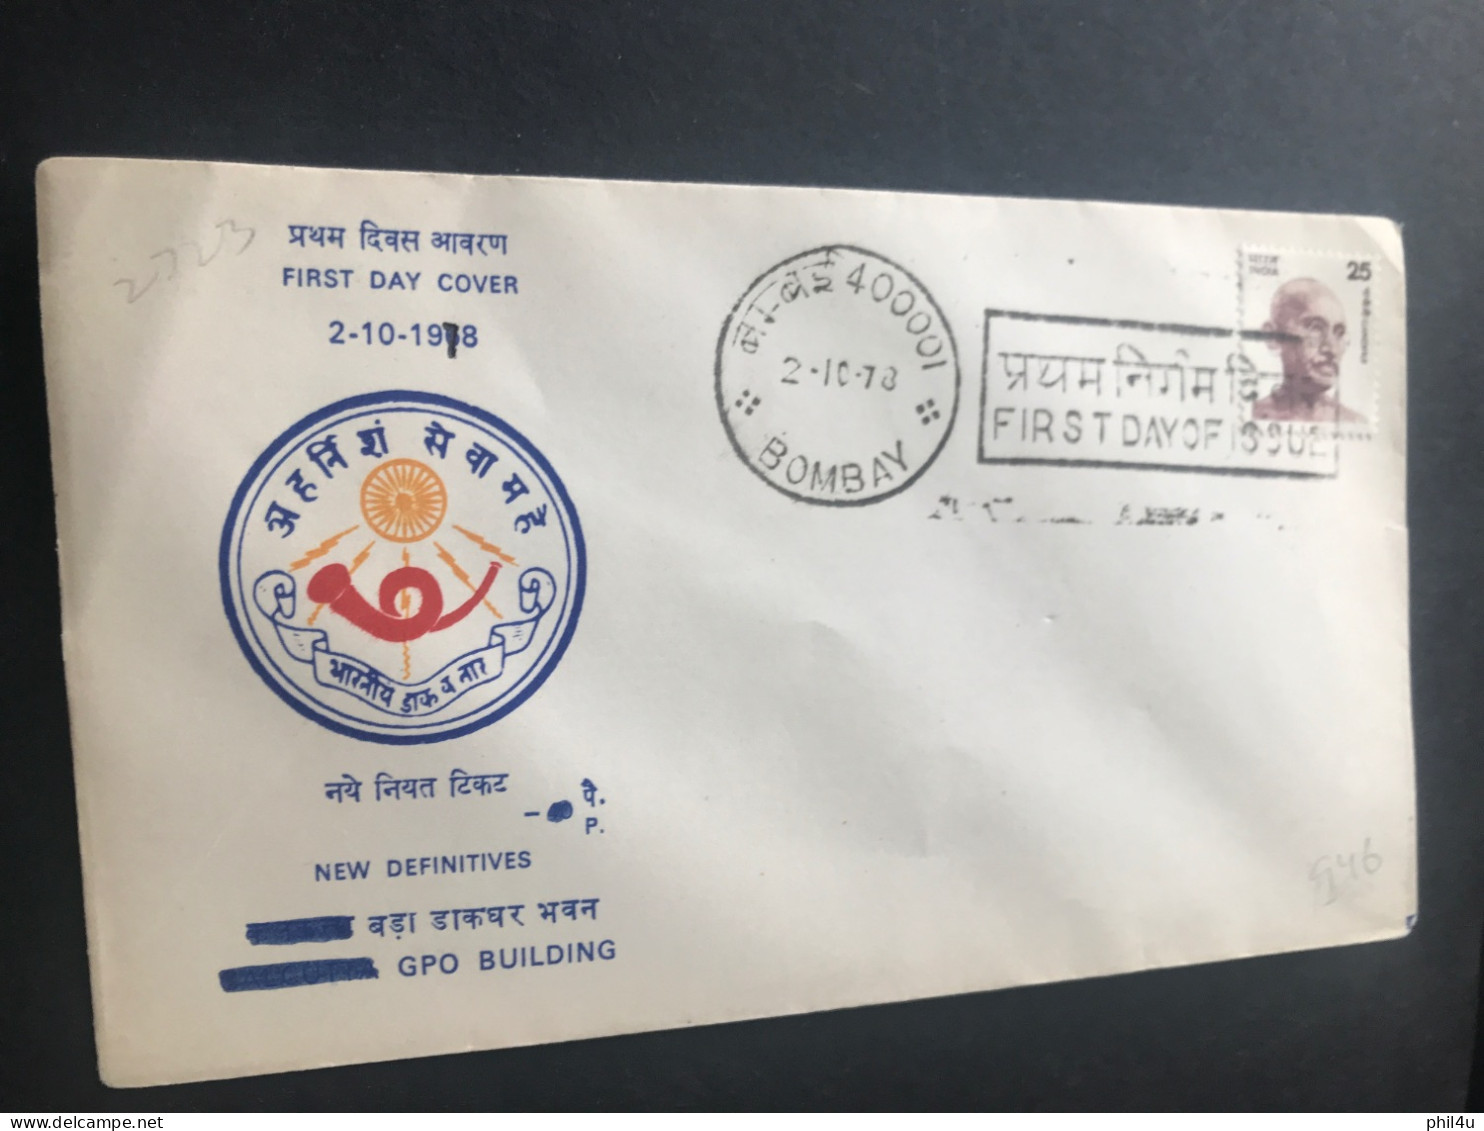 Mahatma Gandhi India FDCover New Deinitives Error Cover Changed Year And Post Office See - Mahatma Gandhi